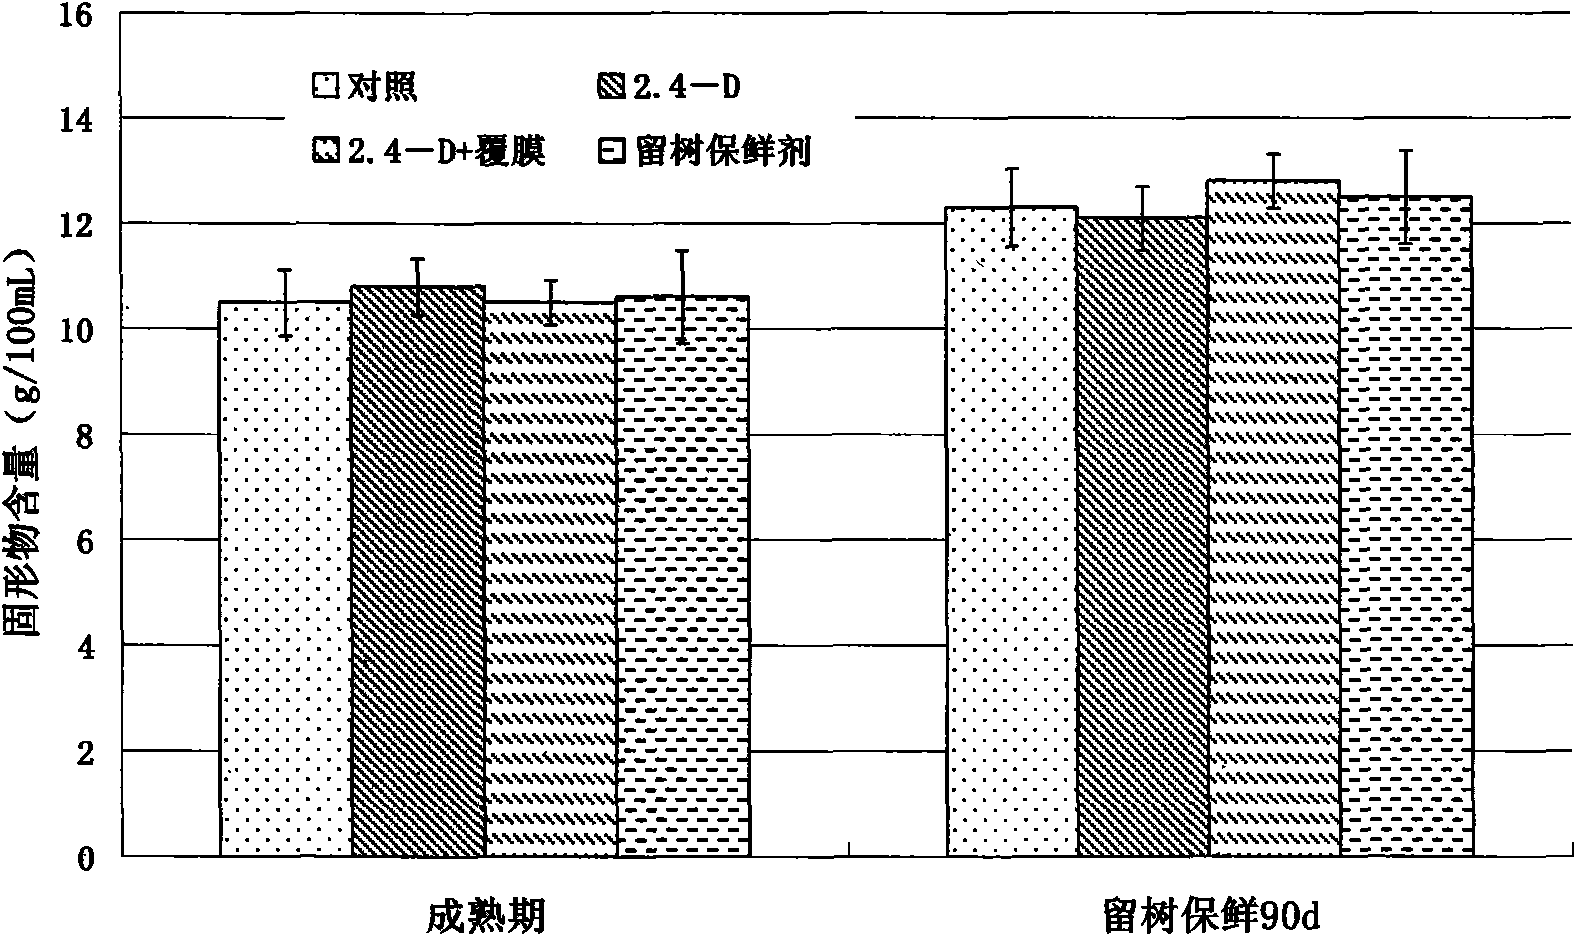 Efficient compound on-tree preservative agent for glorious oranges and preparation method thereof